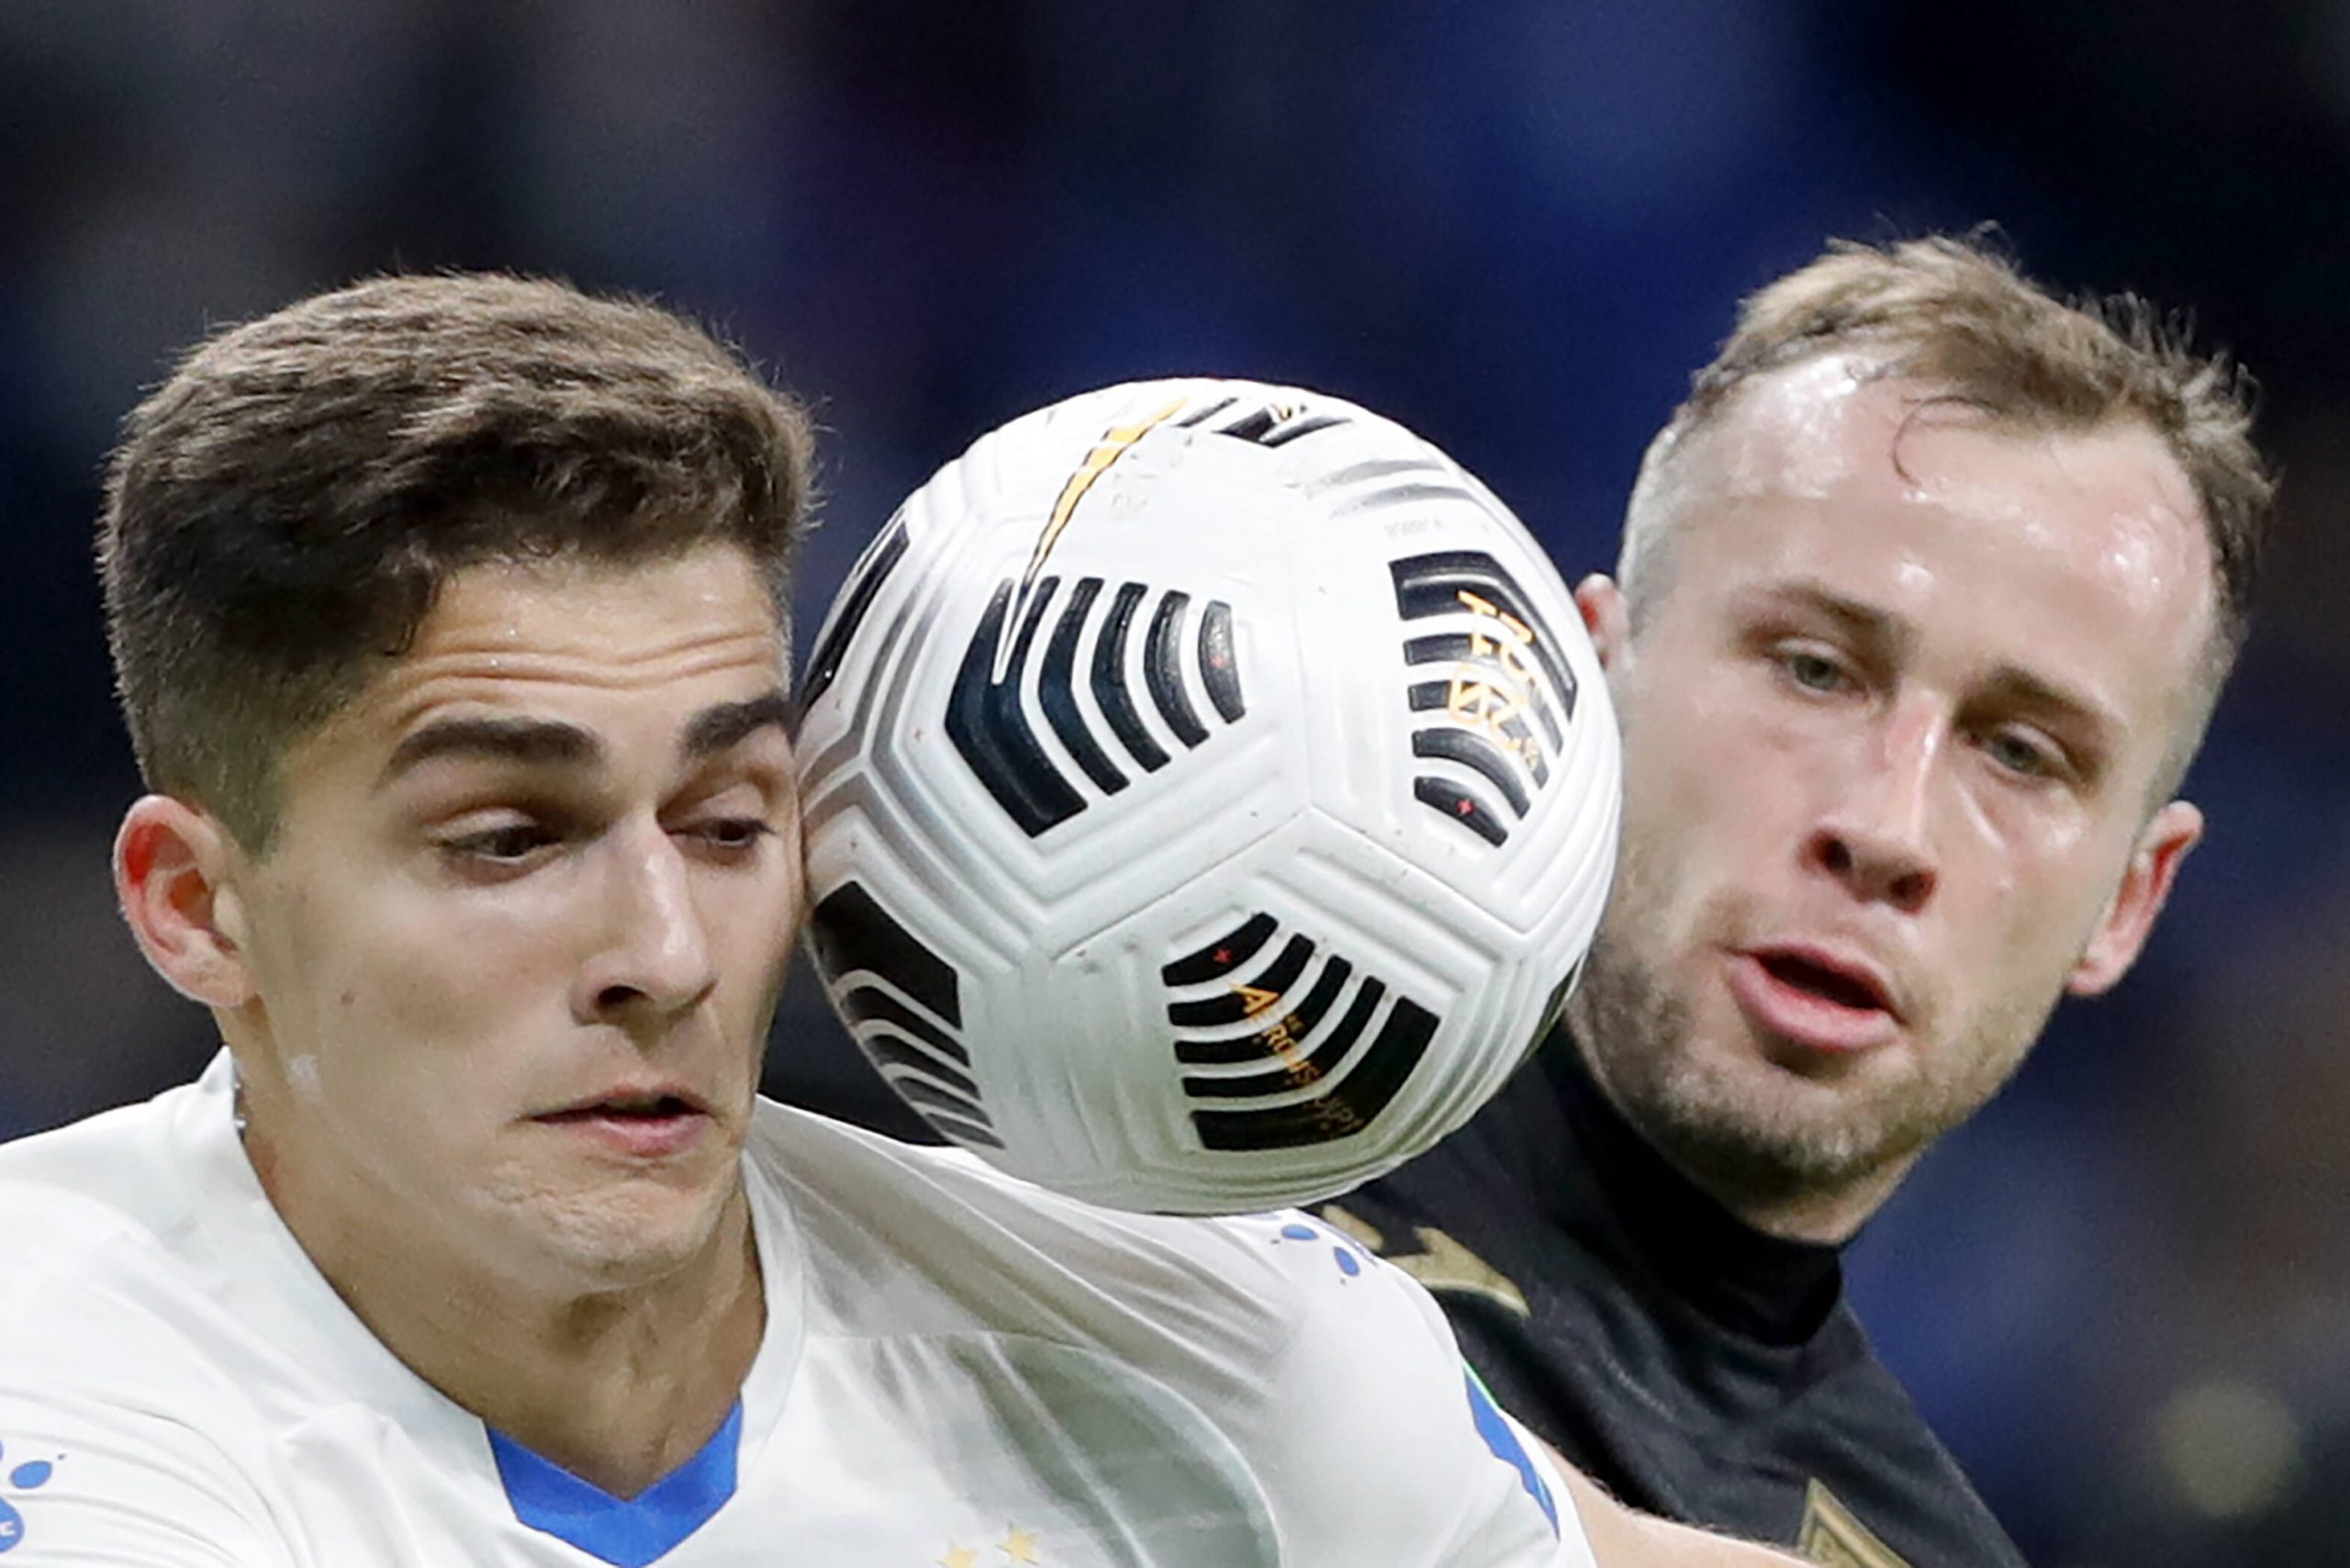 MOSCOW, RUSSIA   APRIL 3, 2021: Dynamo Moscow s Arsen Zakharyan (L) and FC Ufa s Filip Mrzljak head the ball in a 2020/2